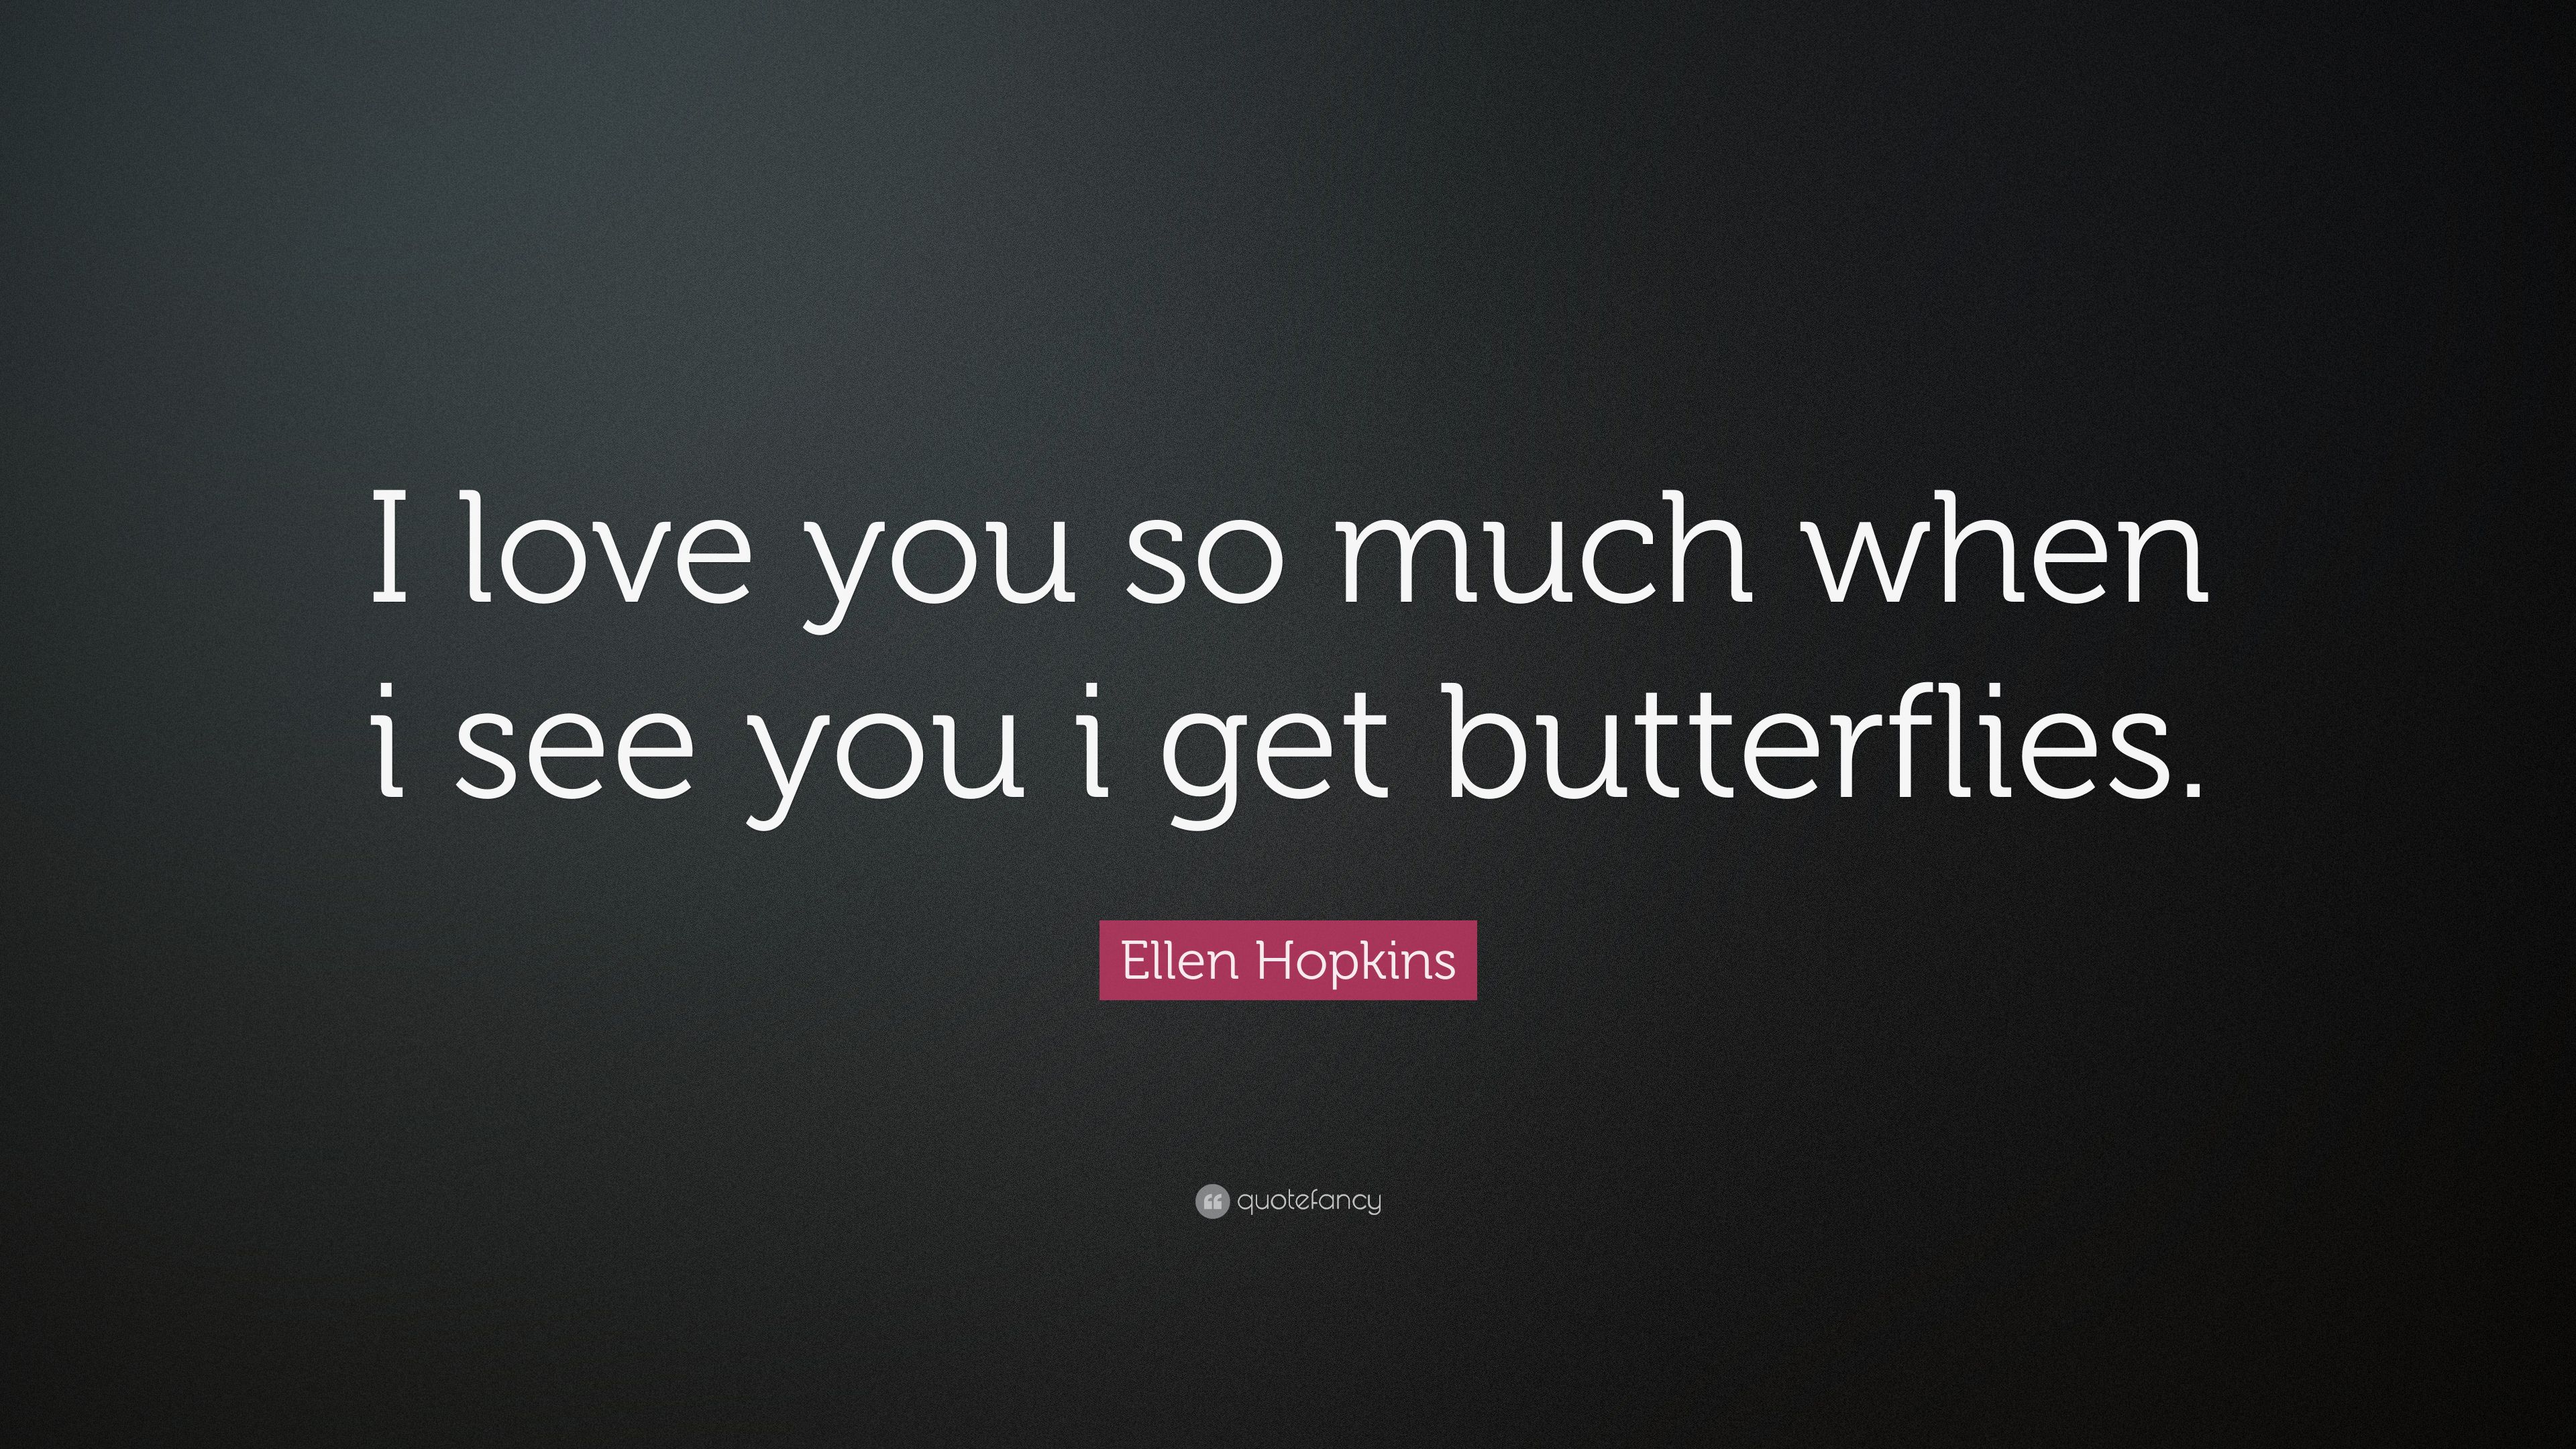 Ellen Hopkins Quote: “I love you so much when i see you i get